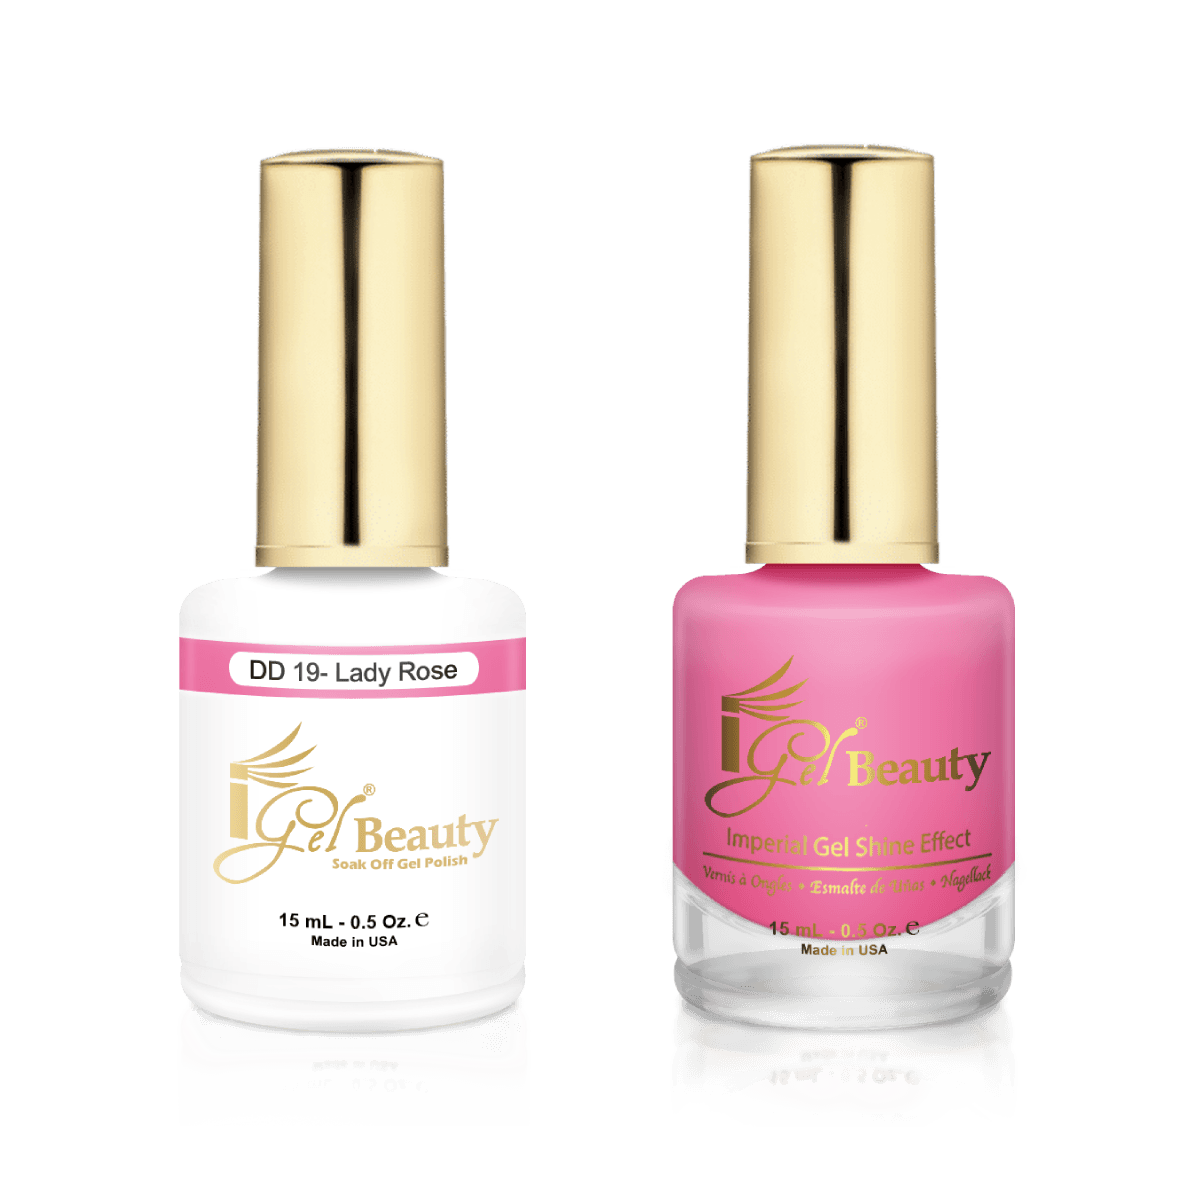 IGel Duo Gel Polish + Matching Nail Lacquer DD 19 LADY ROSE